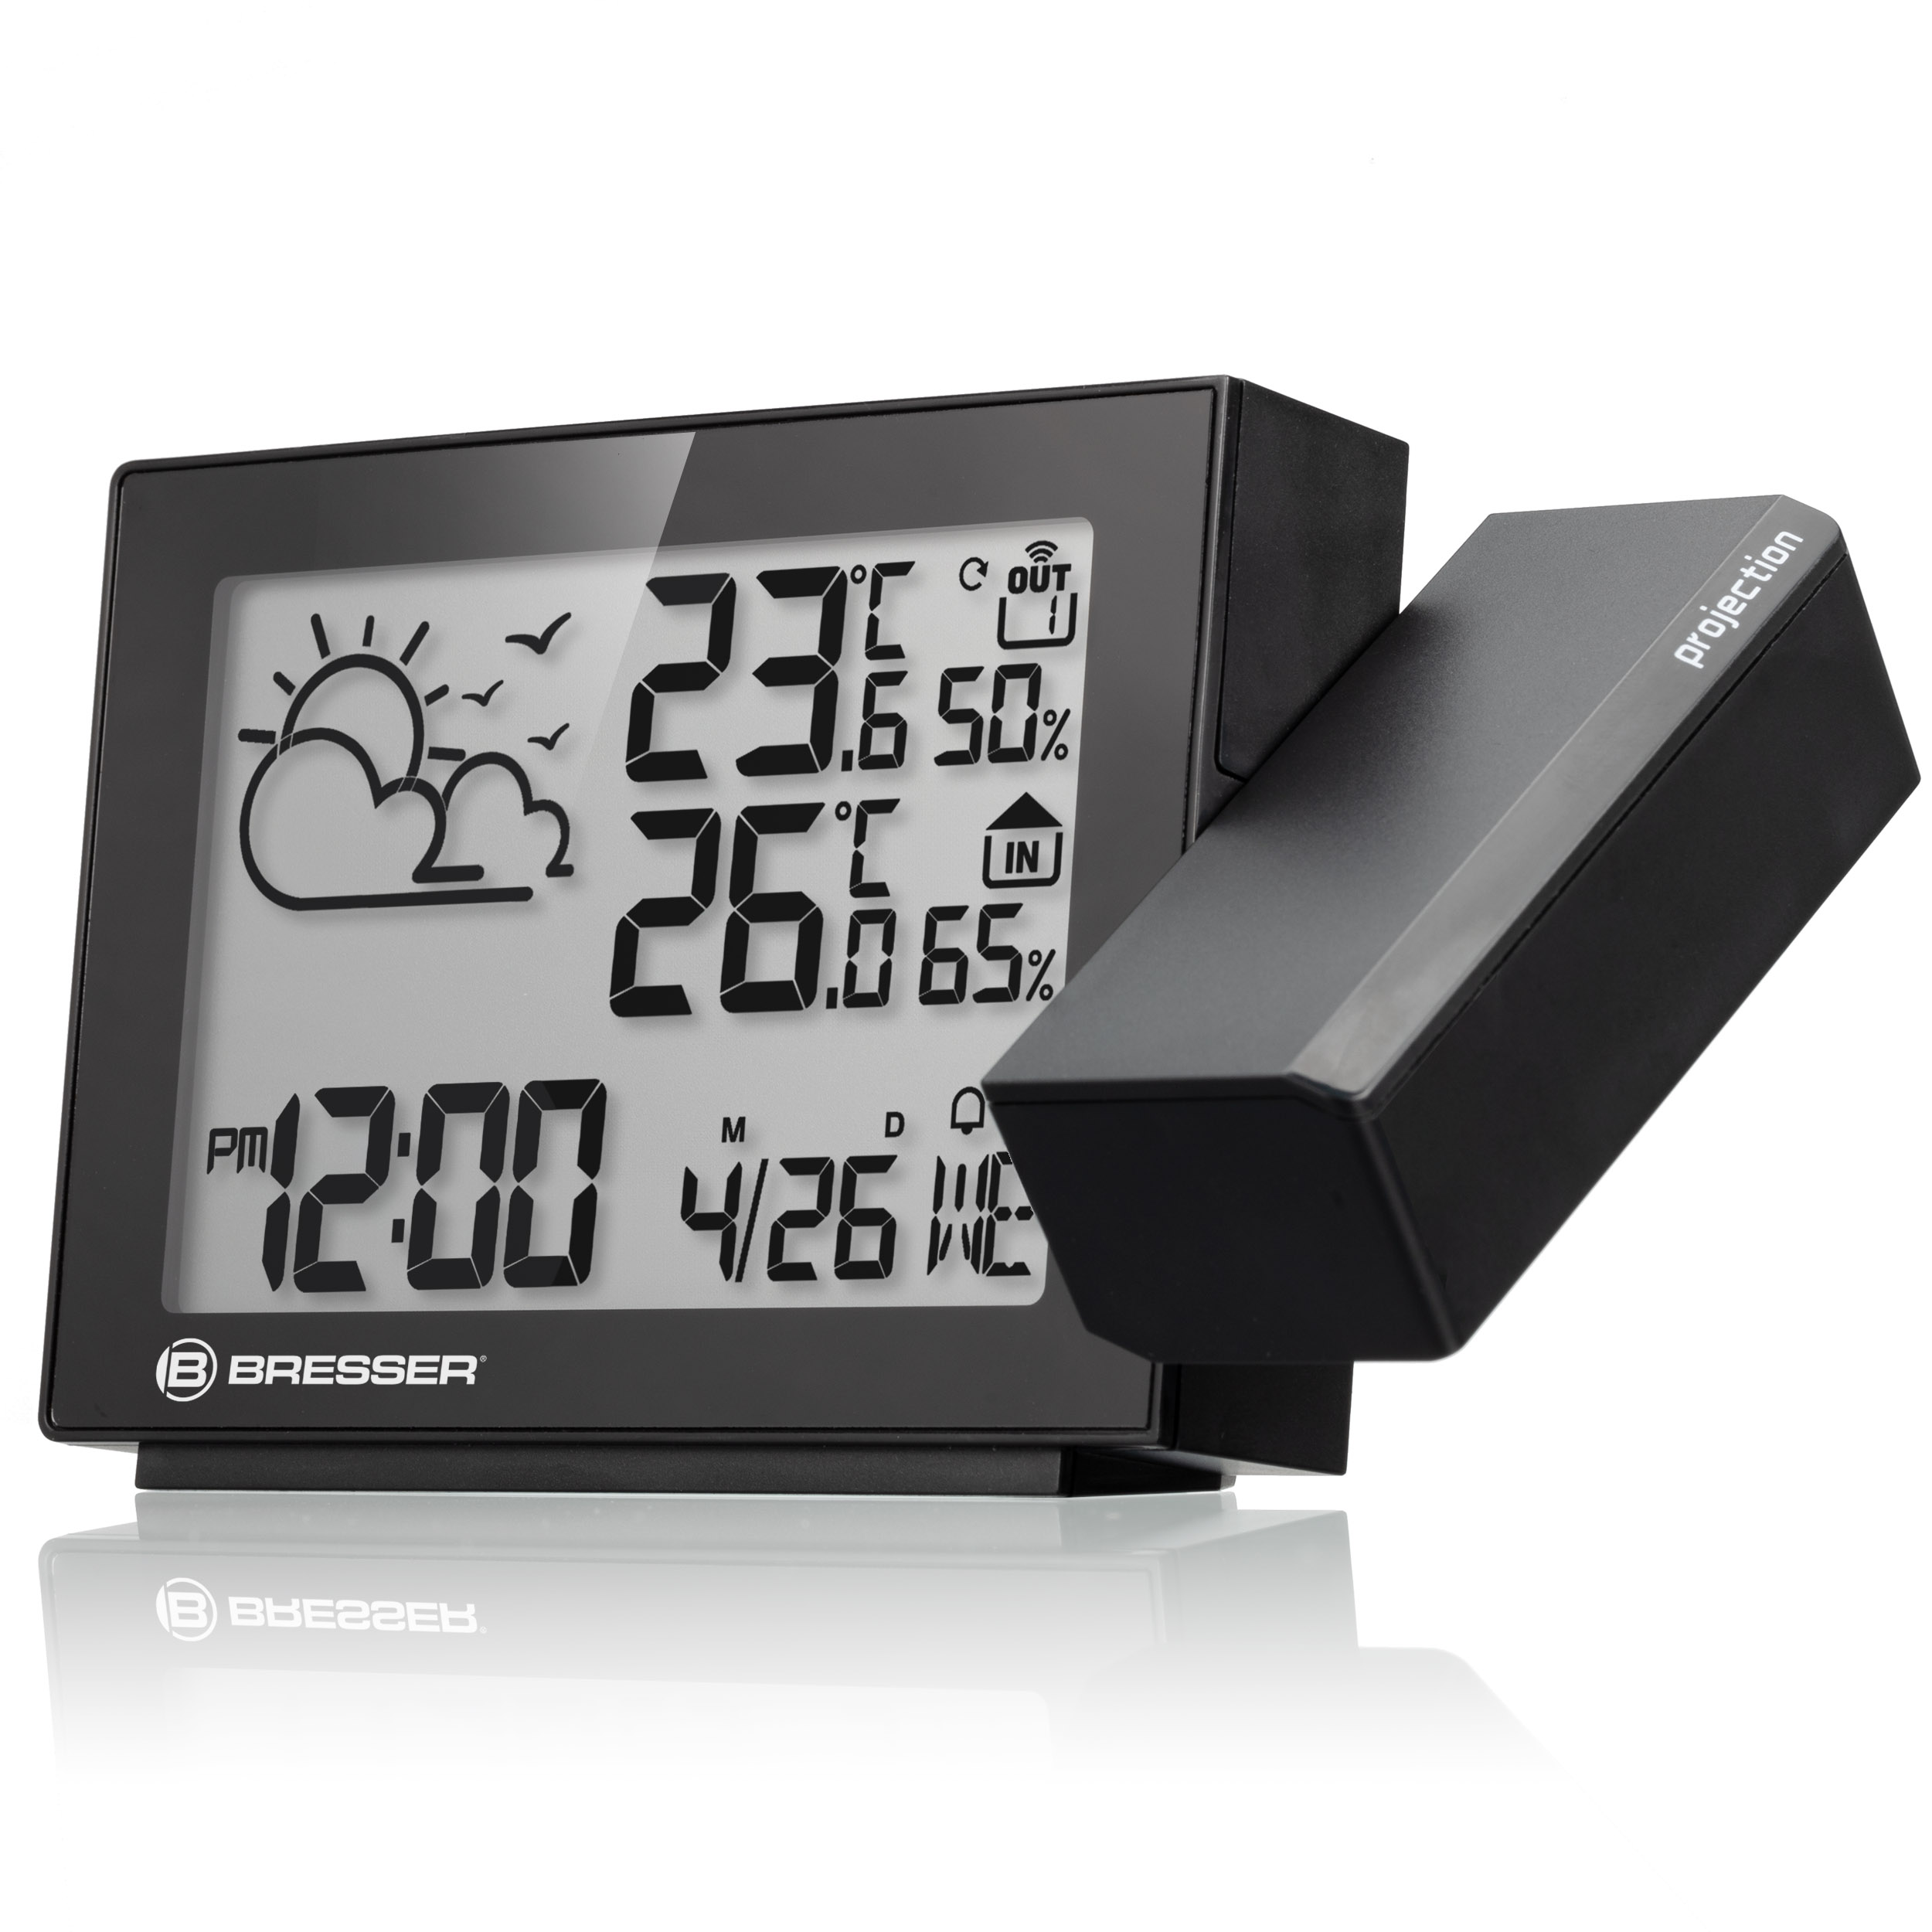 BRESSER Projection Radio-Controlled Weather Station MeteoTemp P